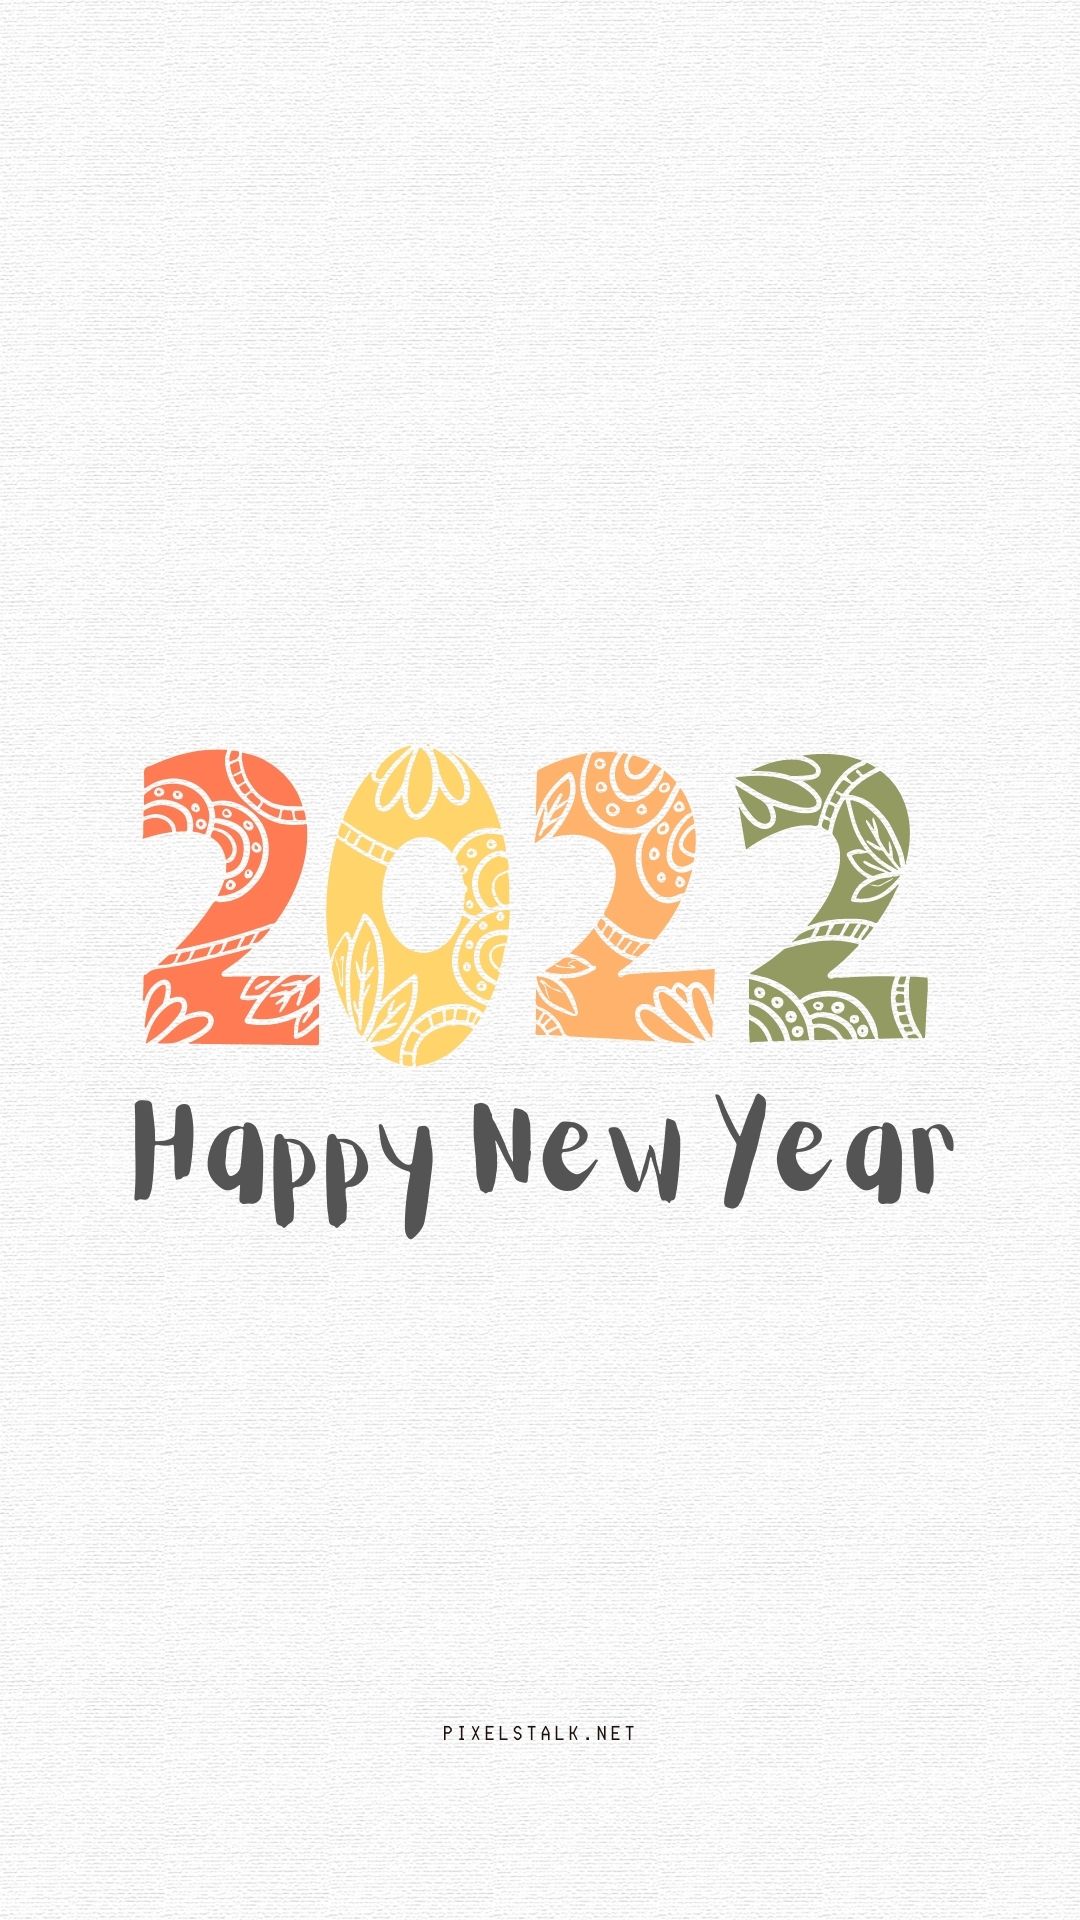 HD wallpaper Happy New Year bulb lights neon sign 2022 Year   Wallpaper Flare